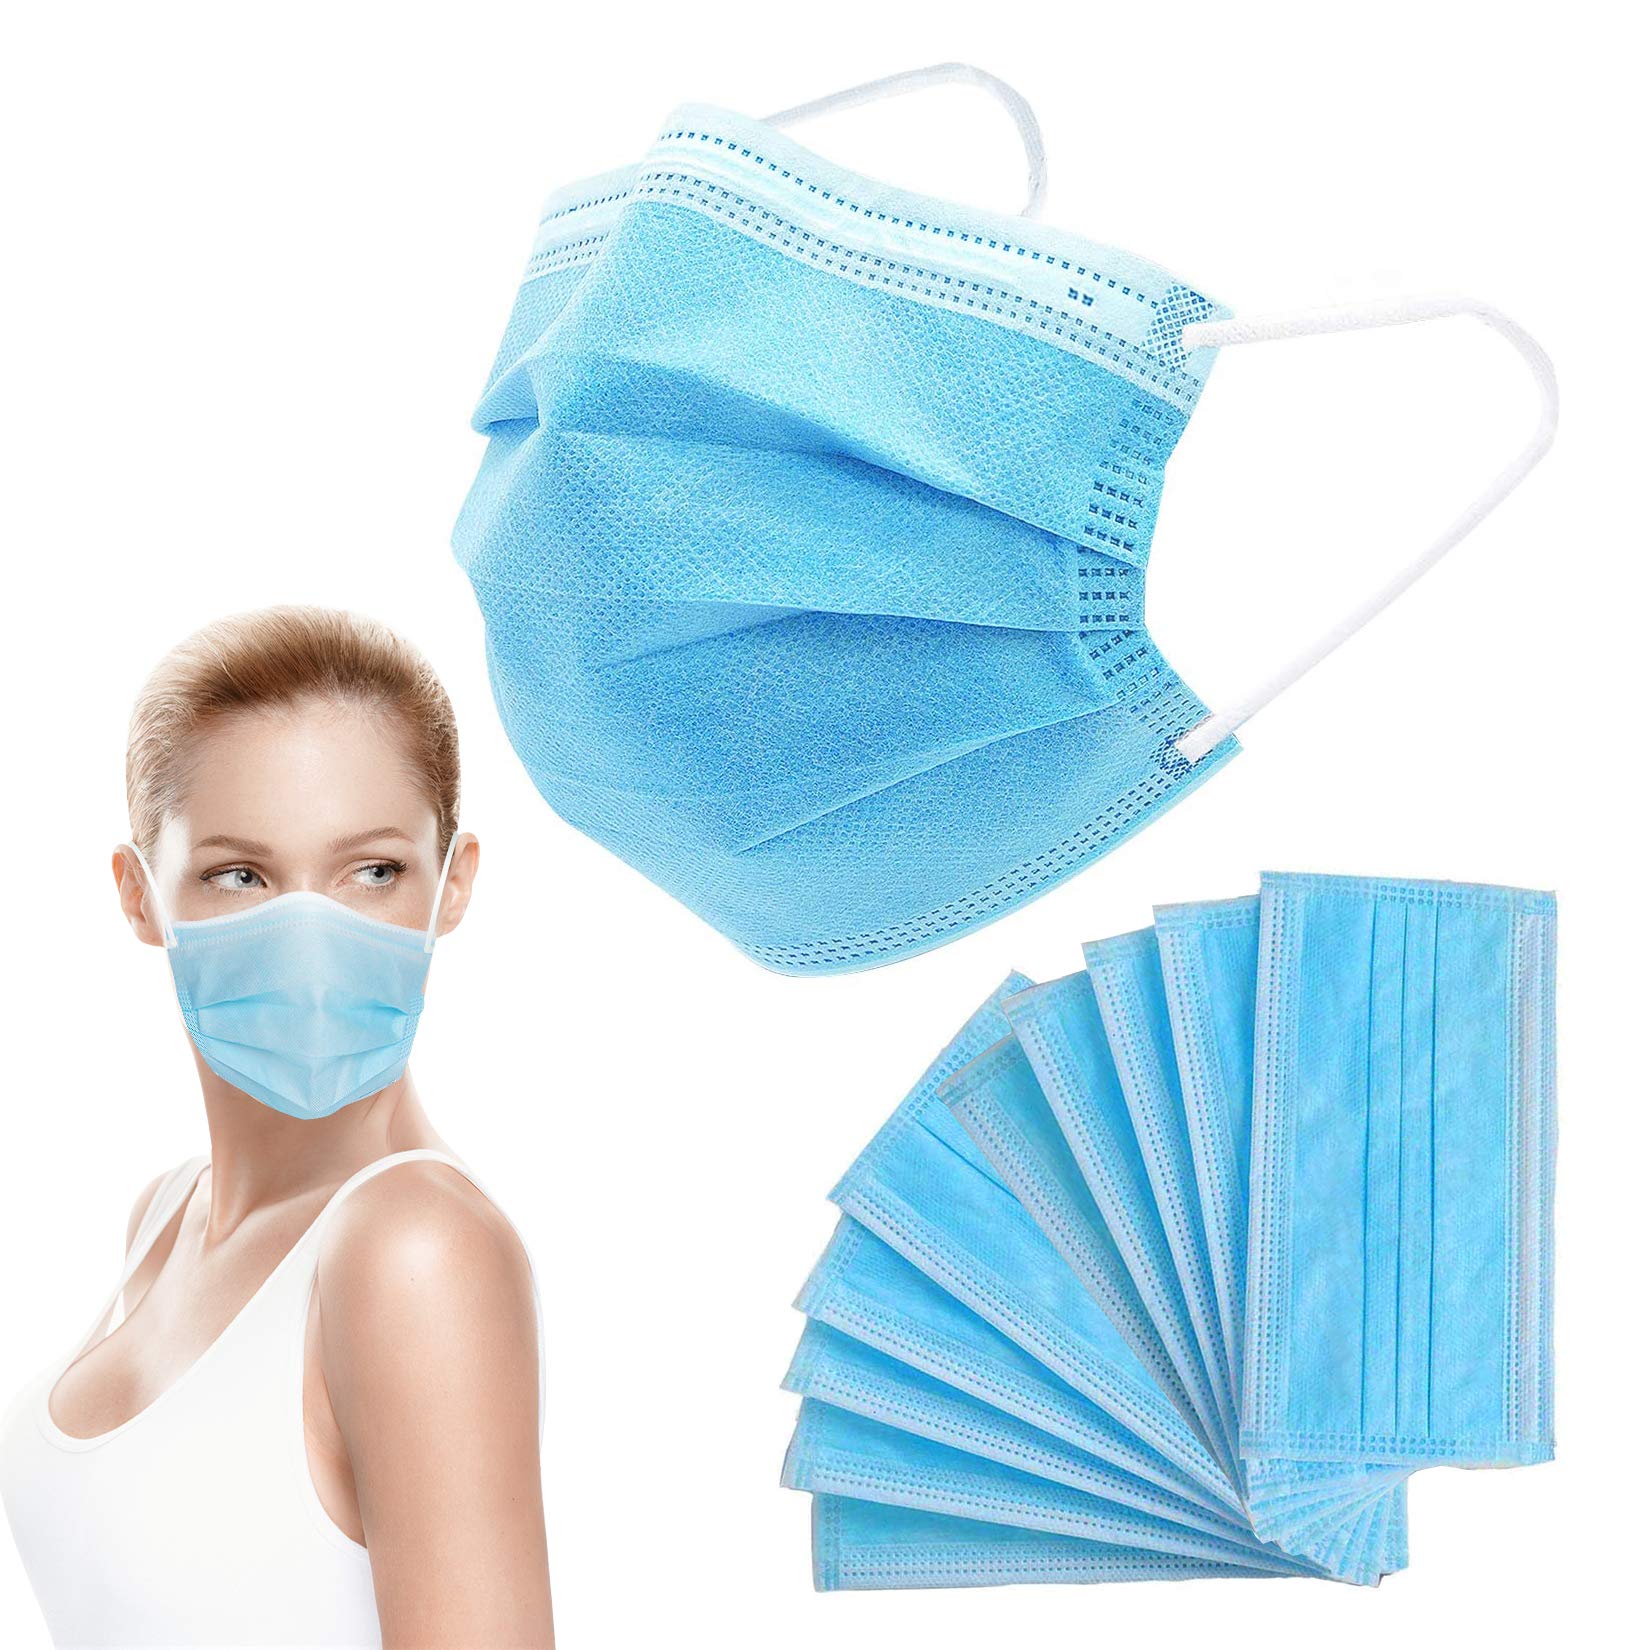 Asofcof 50PCS Disposable Face 3 Layer Anti-Dust Earloops Protective Cover Mask(Blue)